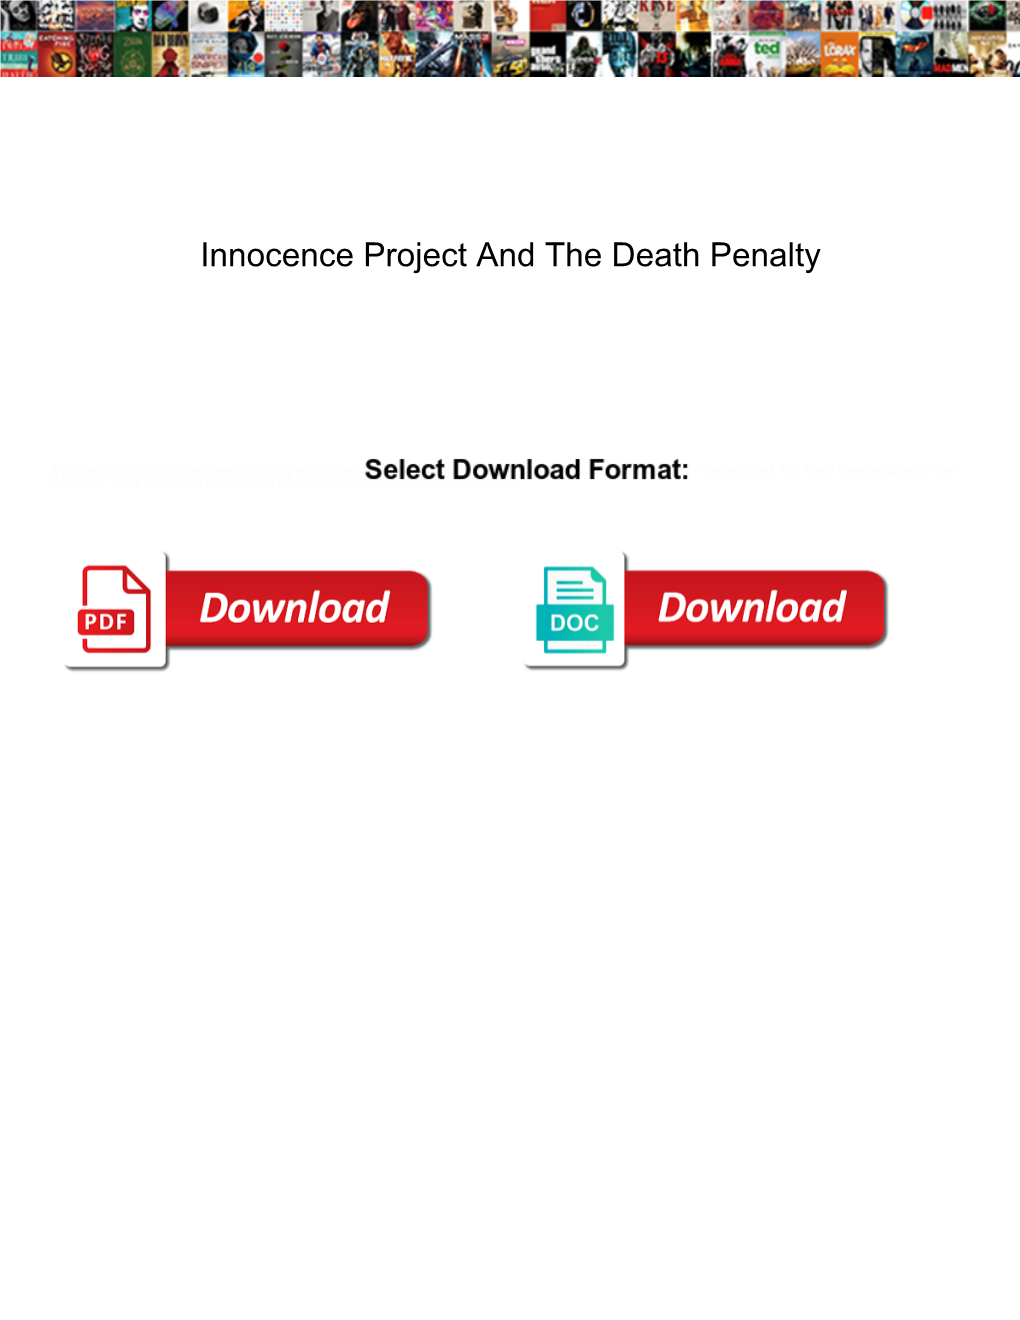 Innocence Project and the Death Penalty